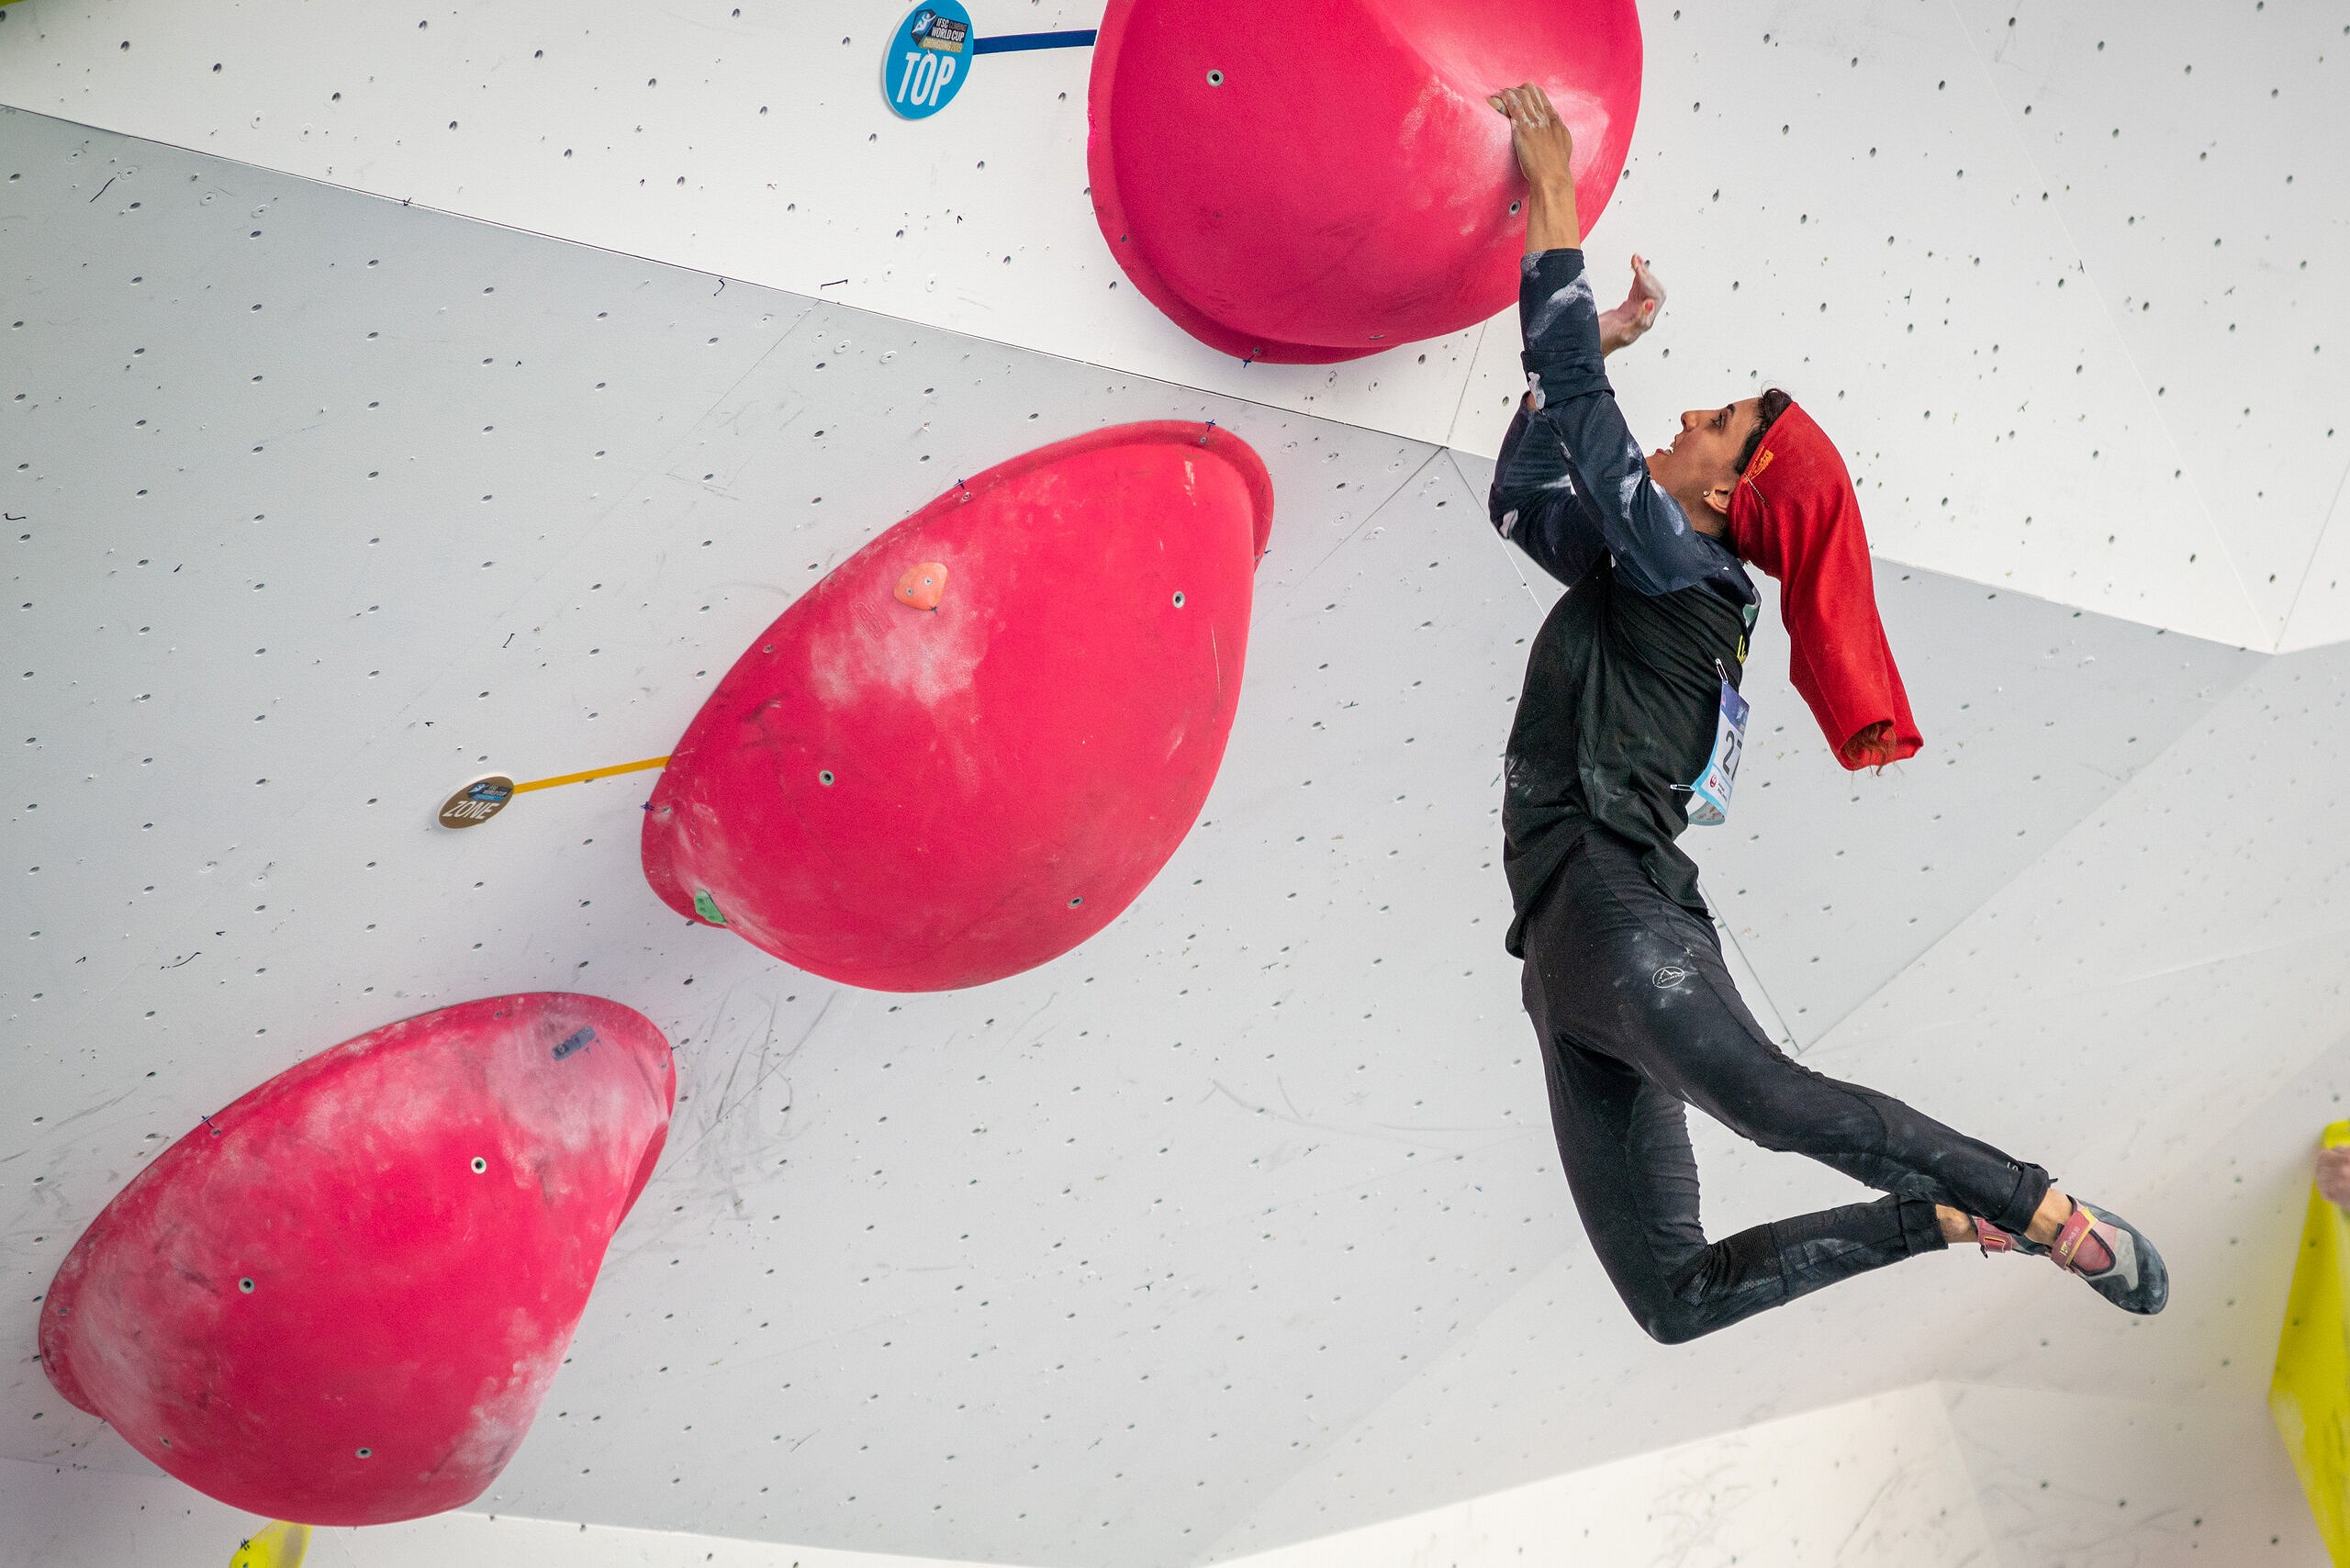 Elnaz Rekabi.competes in an IFSC Boulder World Cup in China.  © The Circuit Climbing/Eddie Fowke